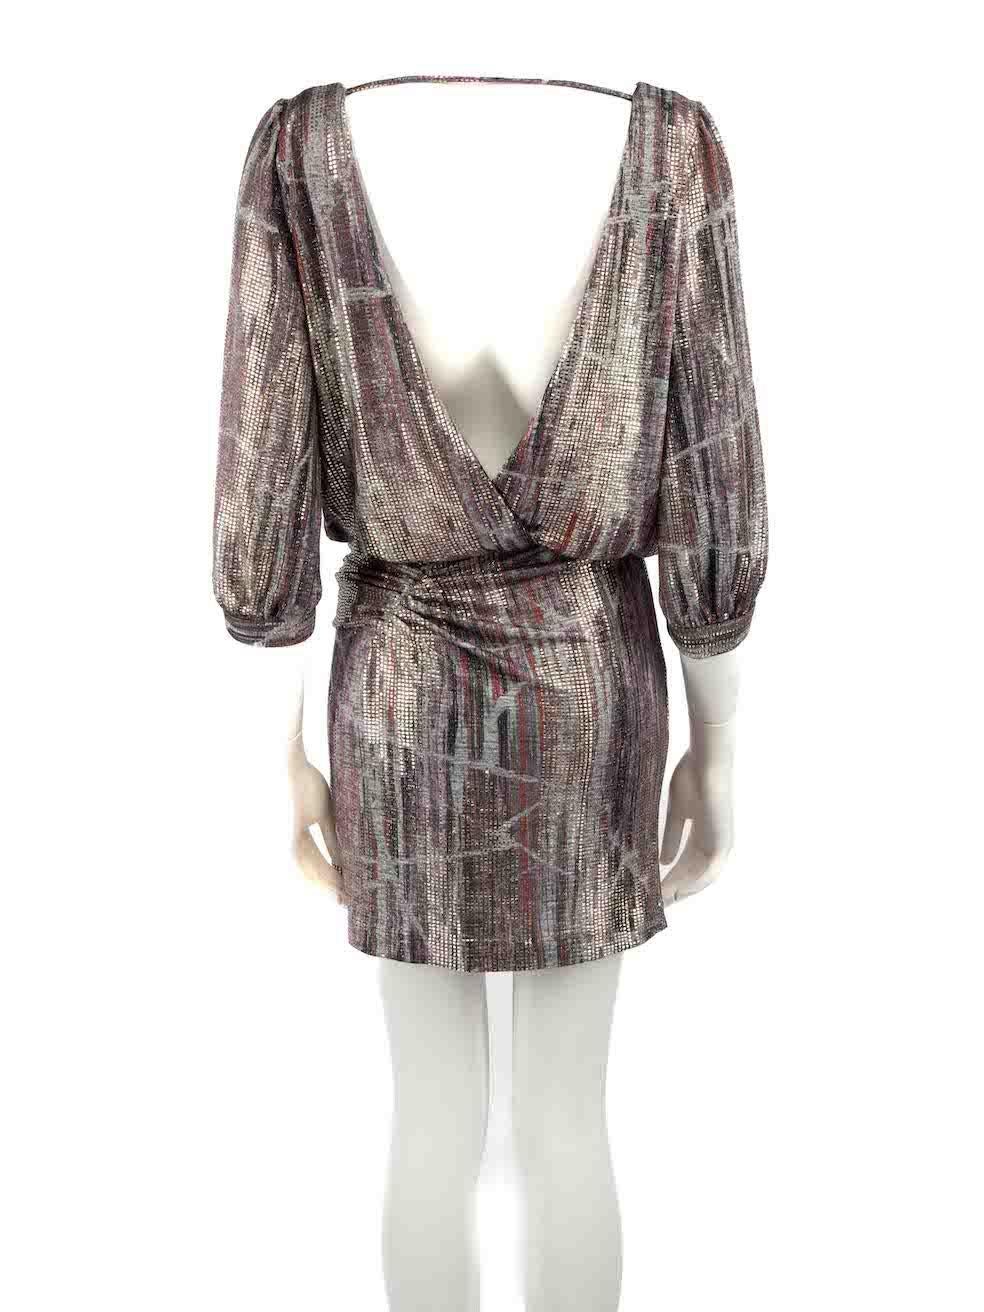 ba&sh Metallic Foiled Open Back Mini Dress Size S In Excellent Condition For Sale In London, GB